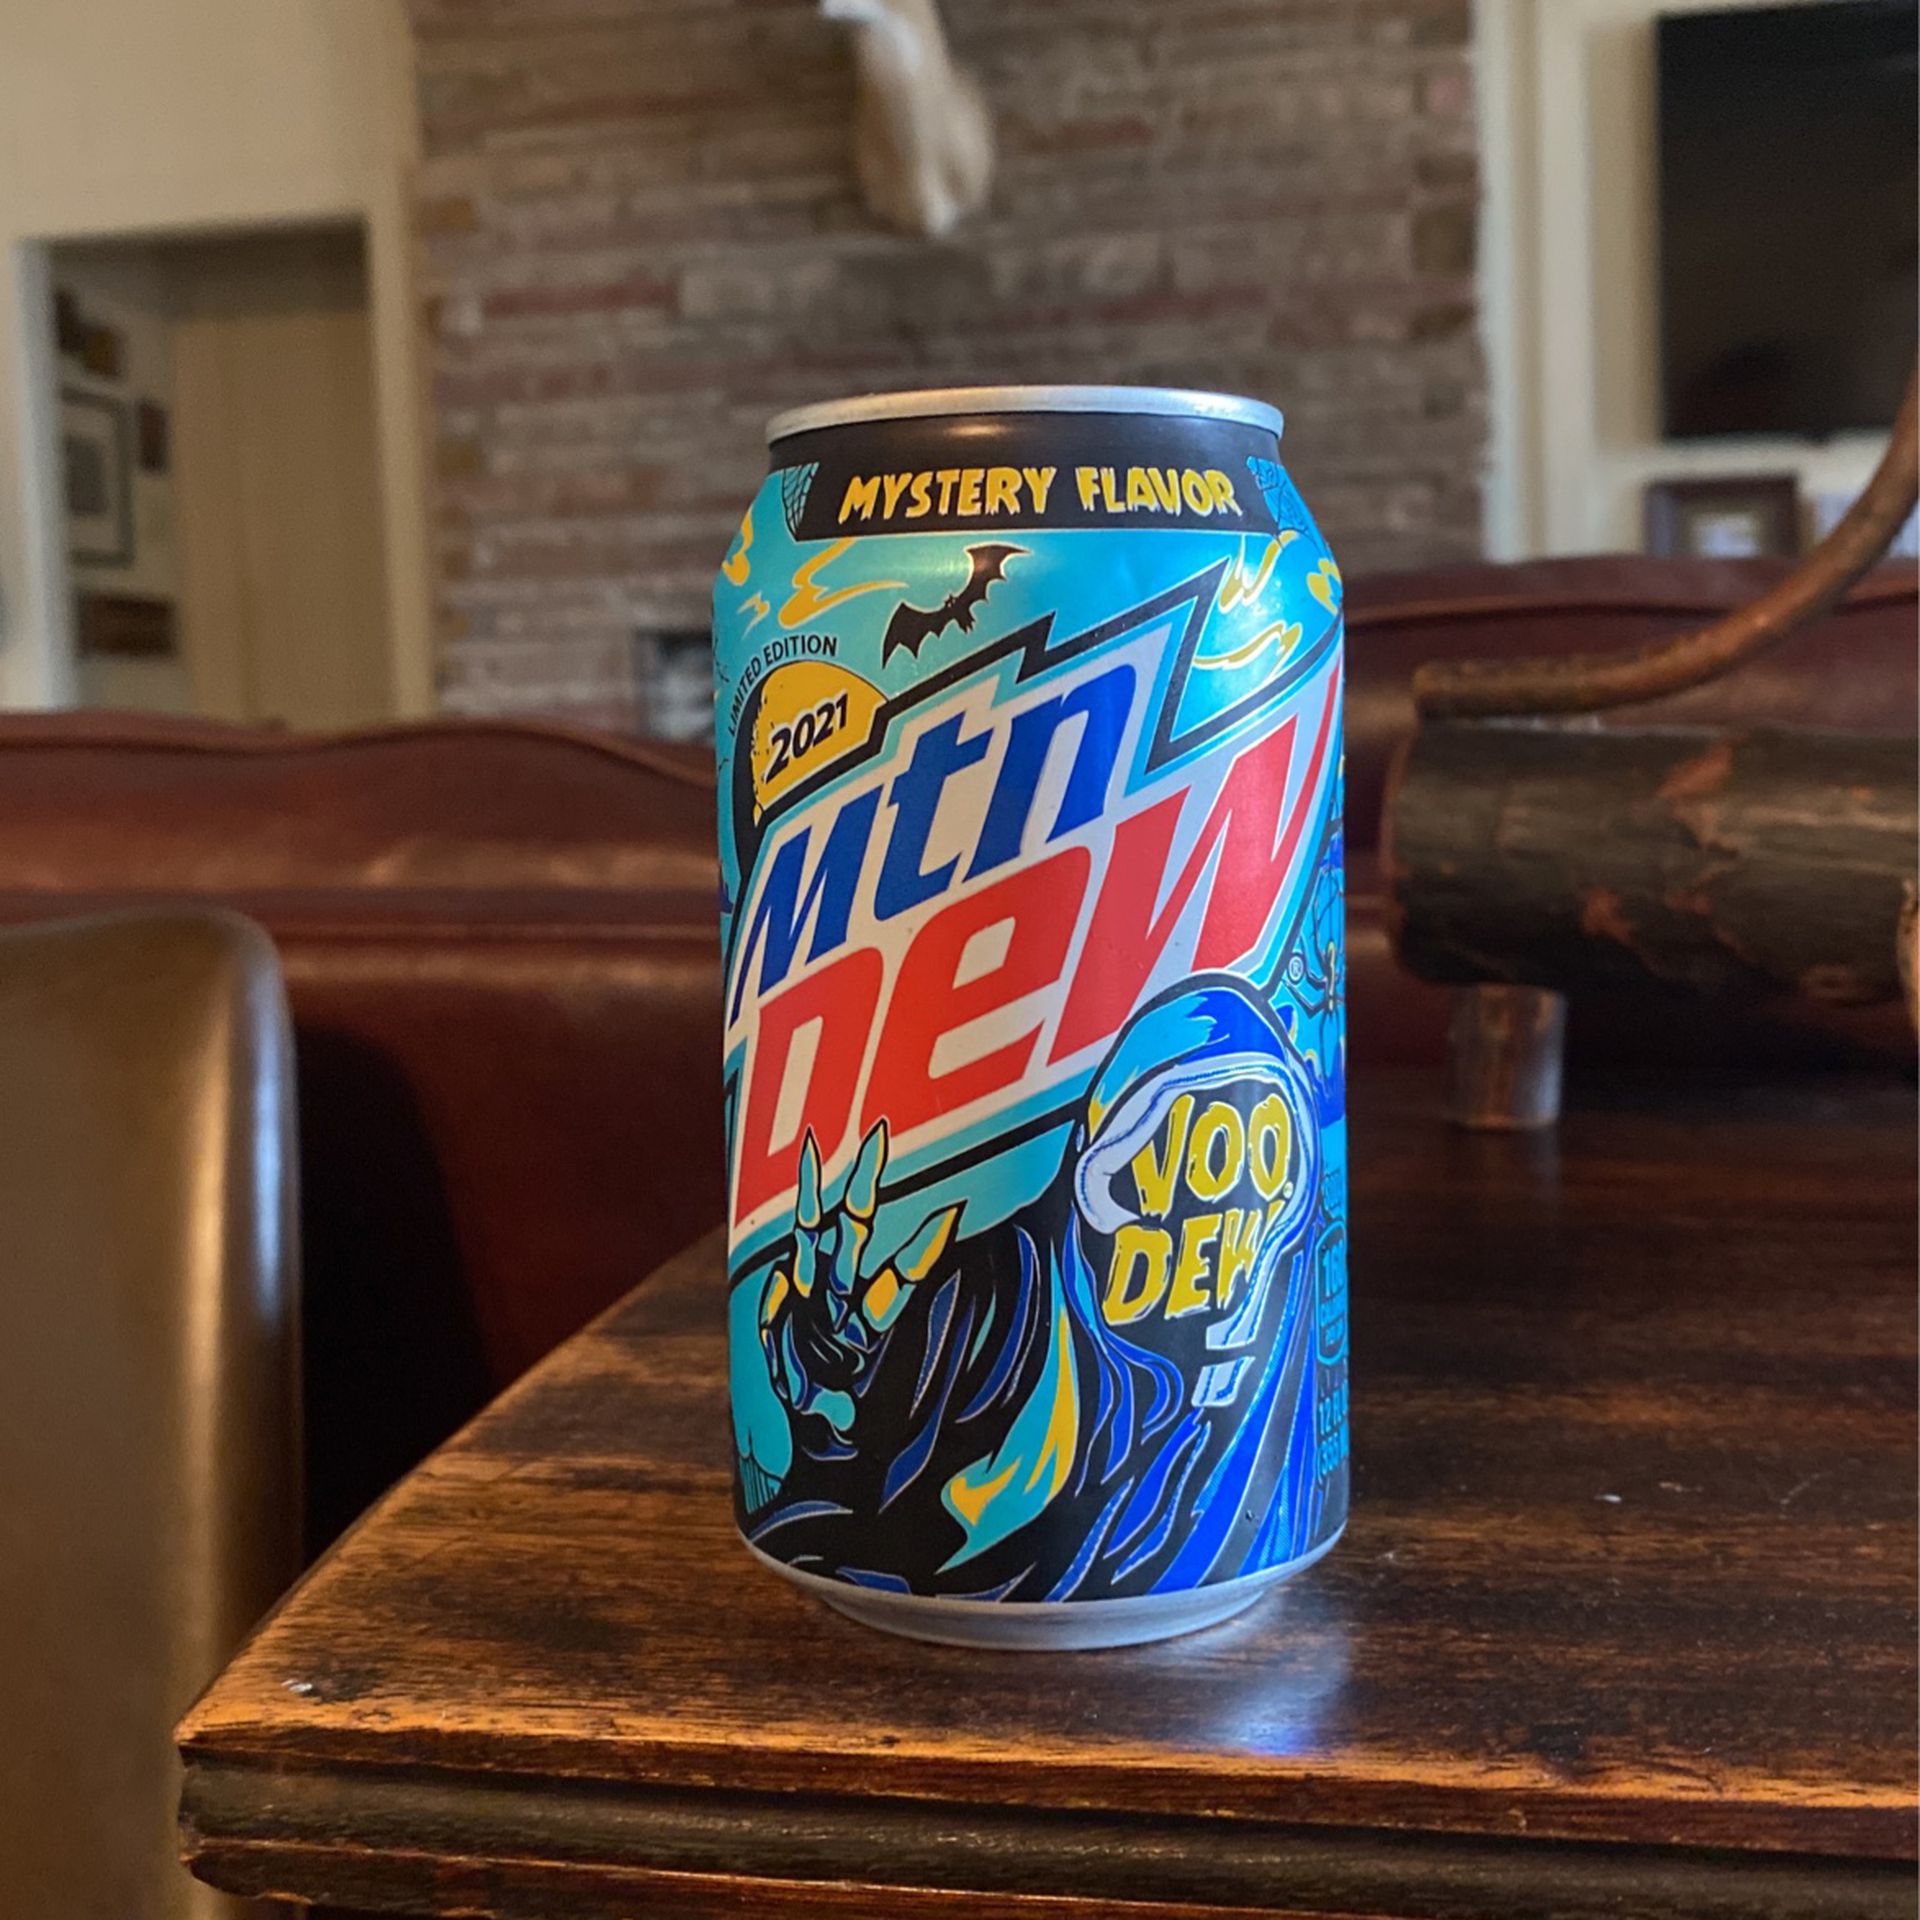 2021 Mountain Dew (VooDew)-Limited Edition-Mystery Flavor